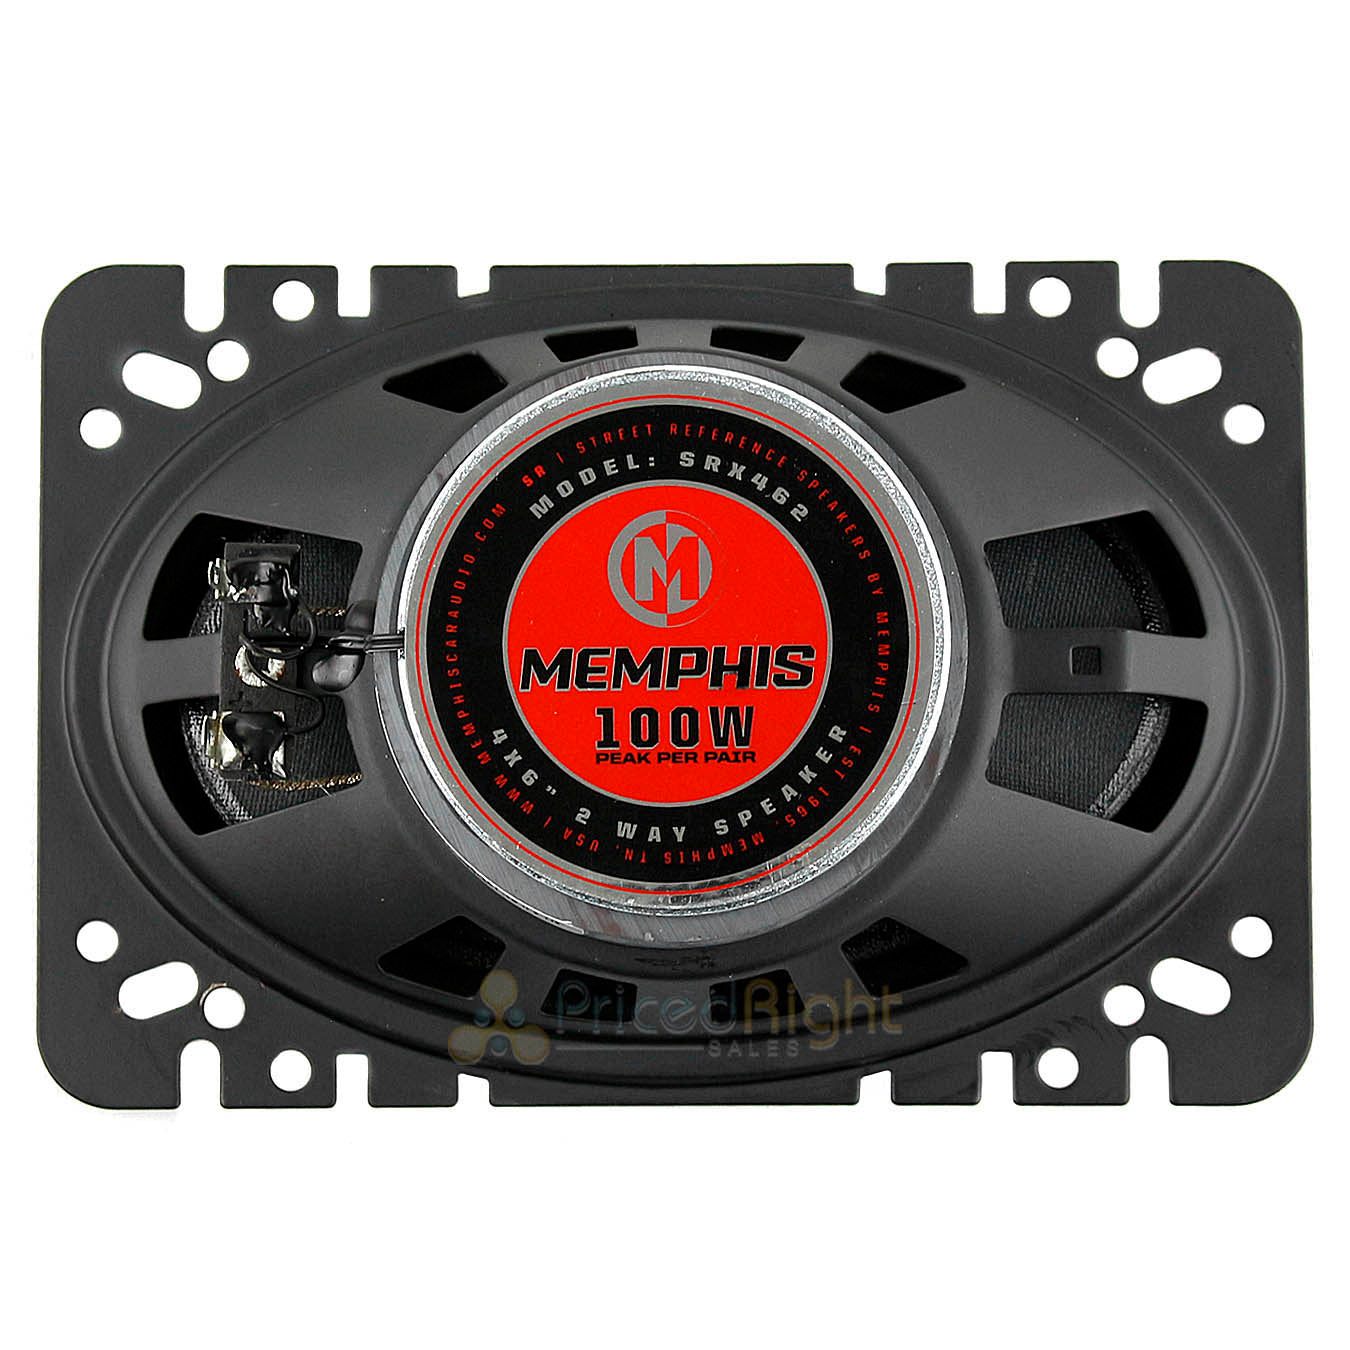 4 Pack Memphis Audio 4x6" 2 Way Coaxial Speakers 50W Max Street Reference SRX462